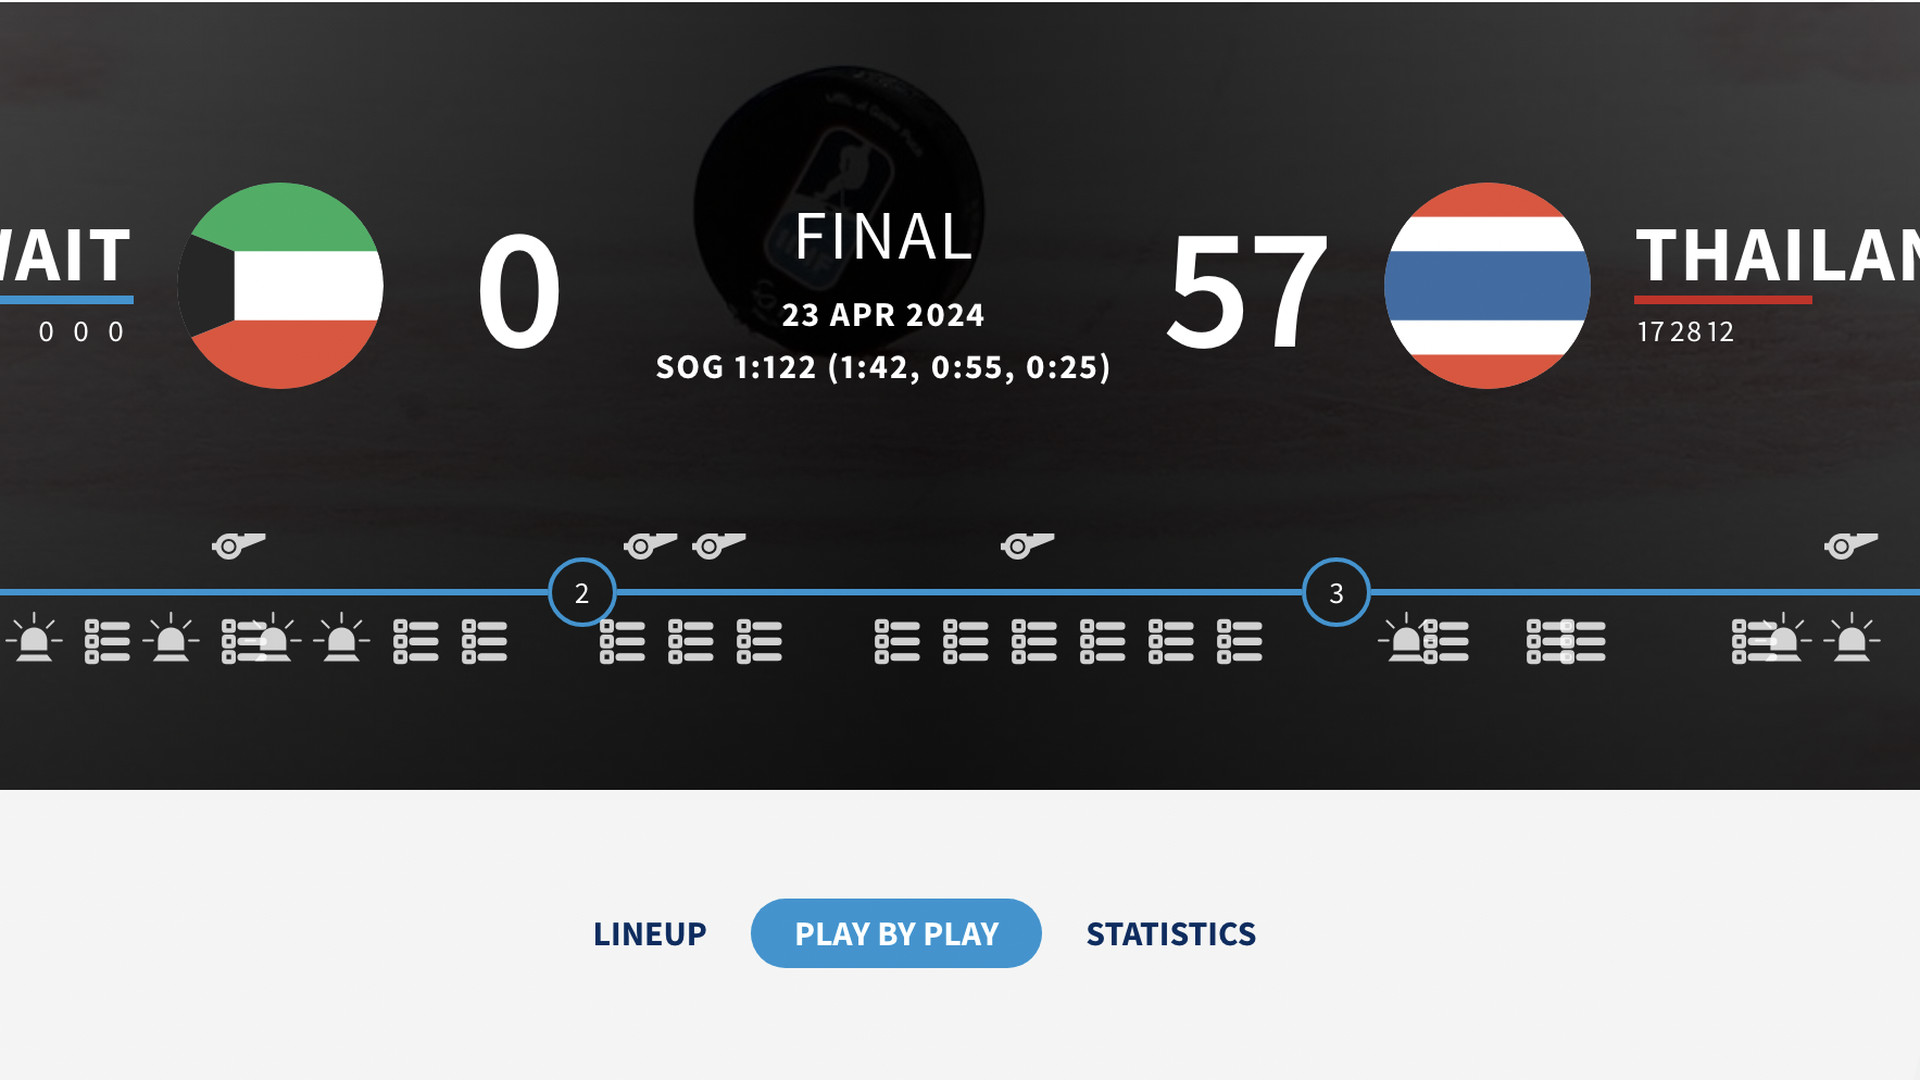 thailand destroyed kuwait 57-0 in one of the biggest hockey beatdowns ever